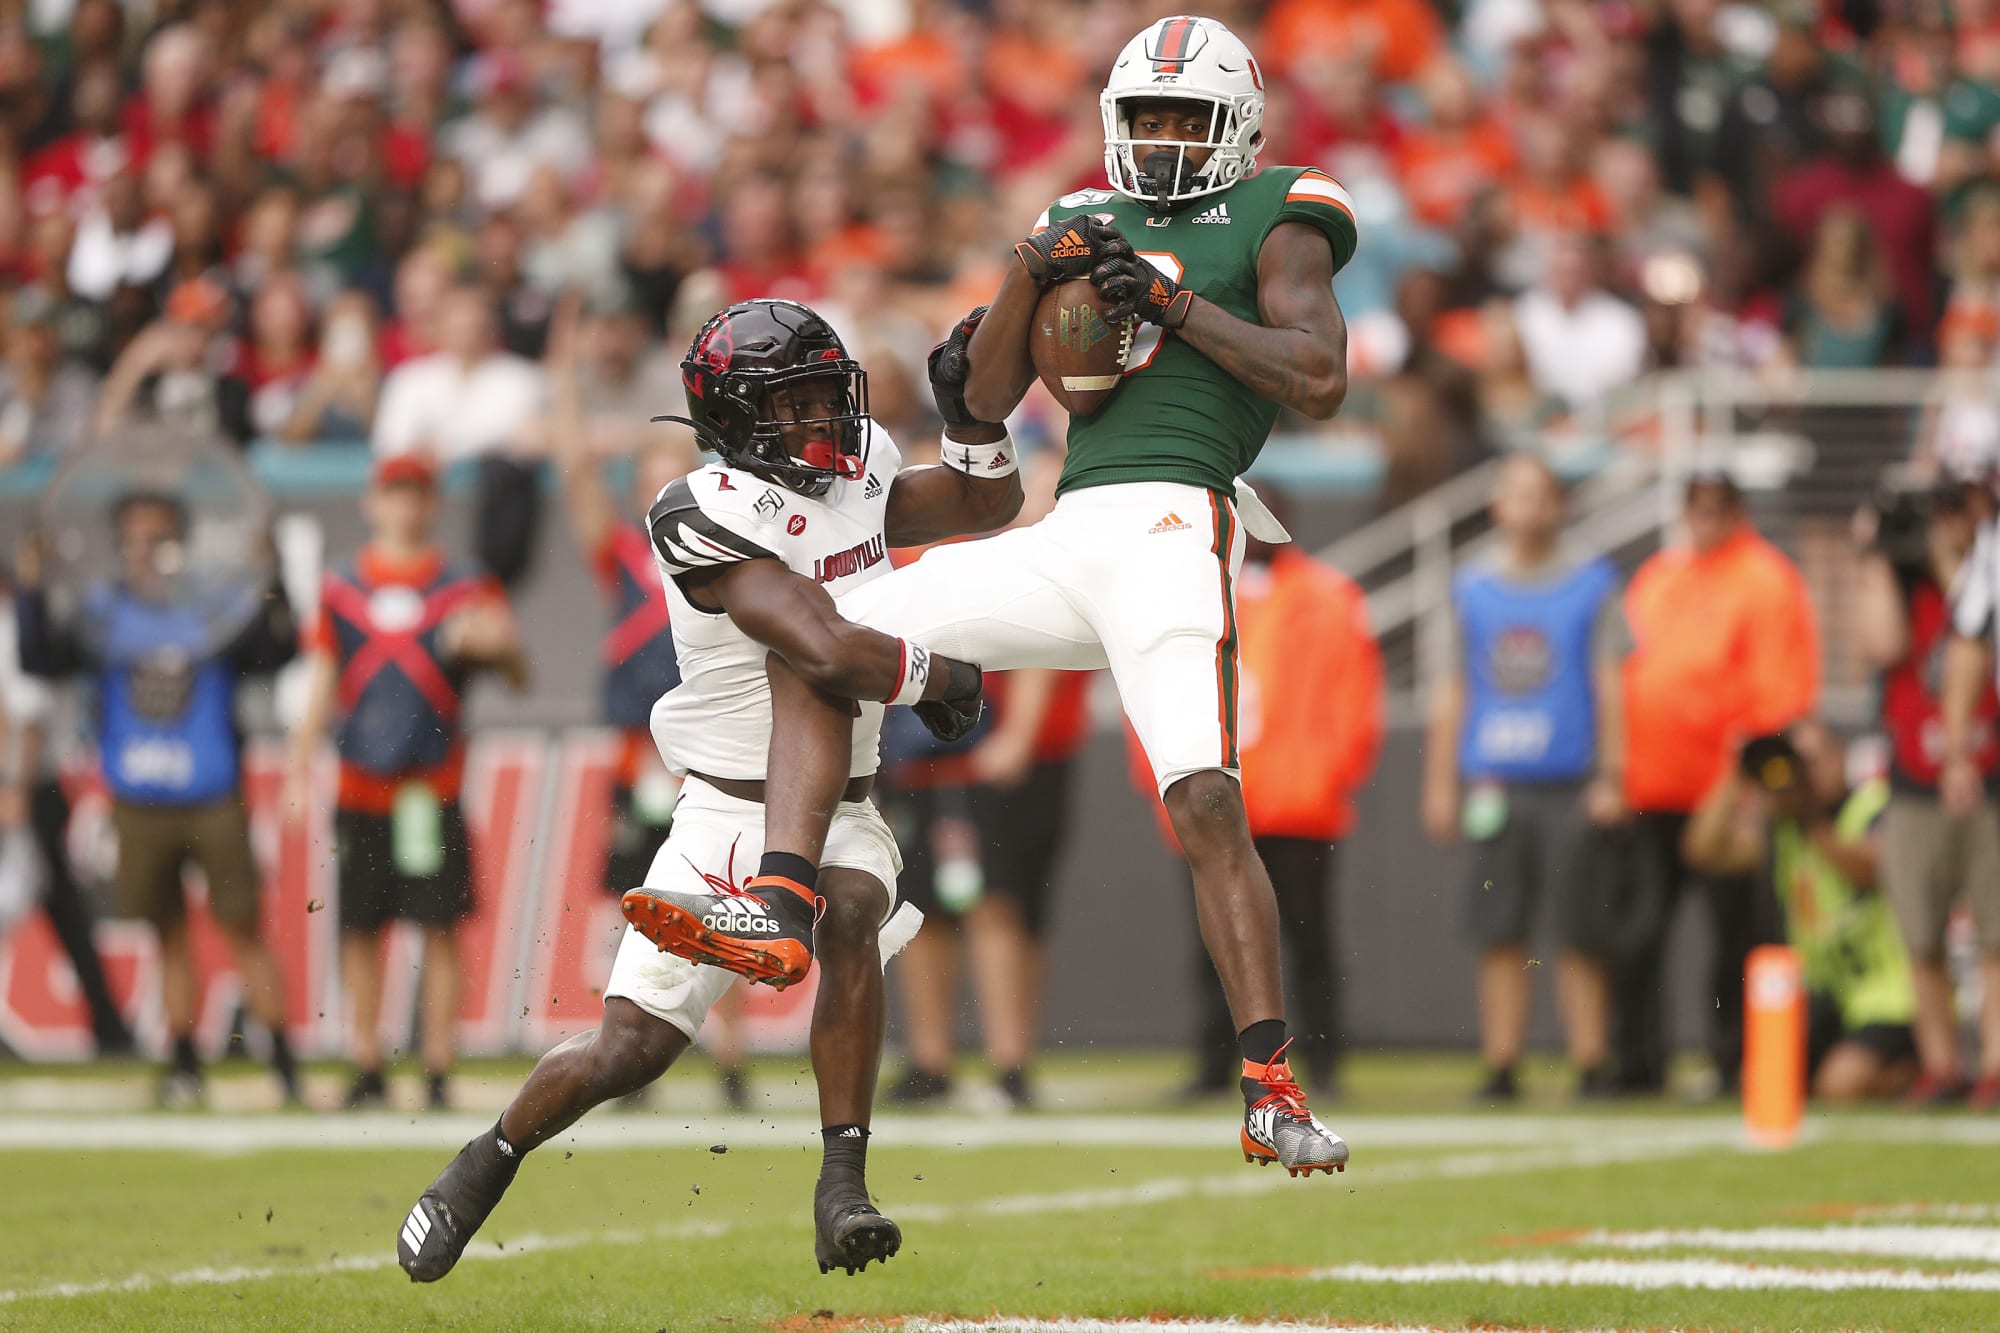 Miami football schedule 2020: A quick look